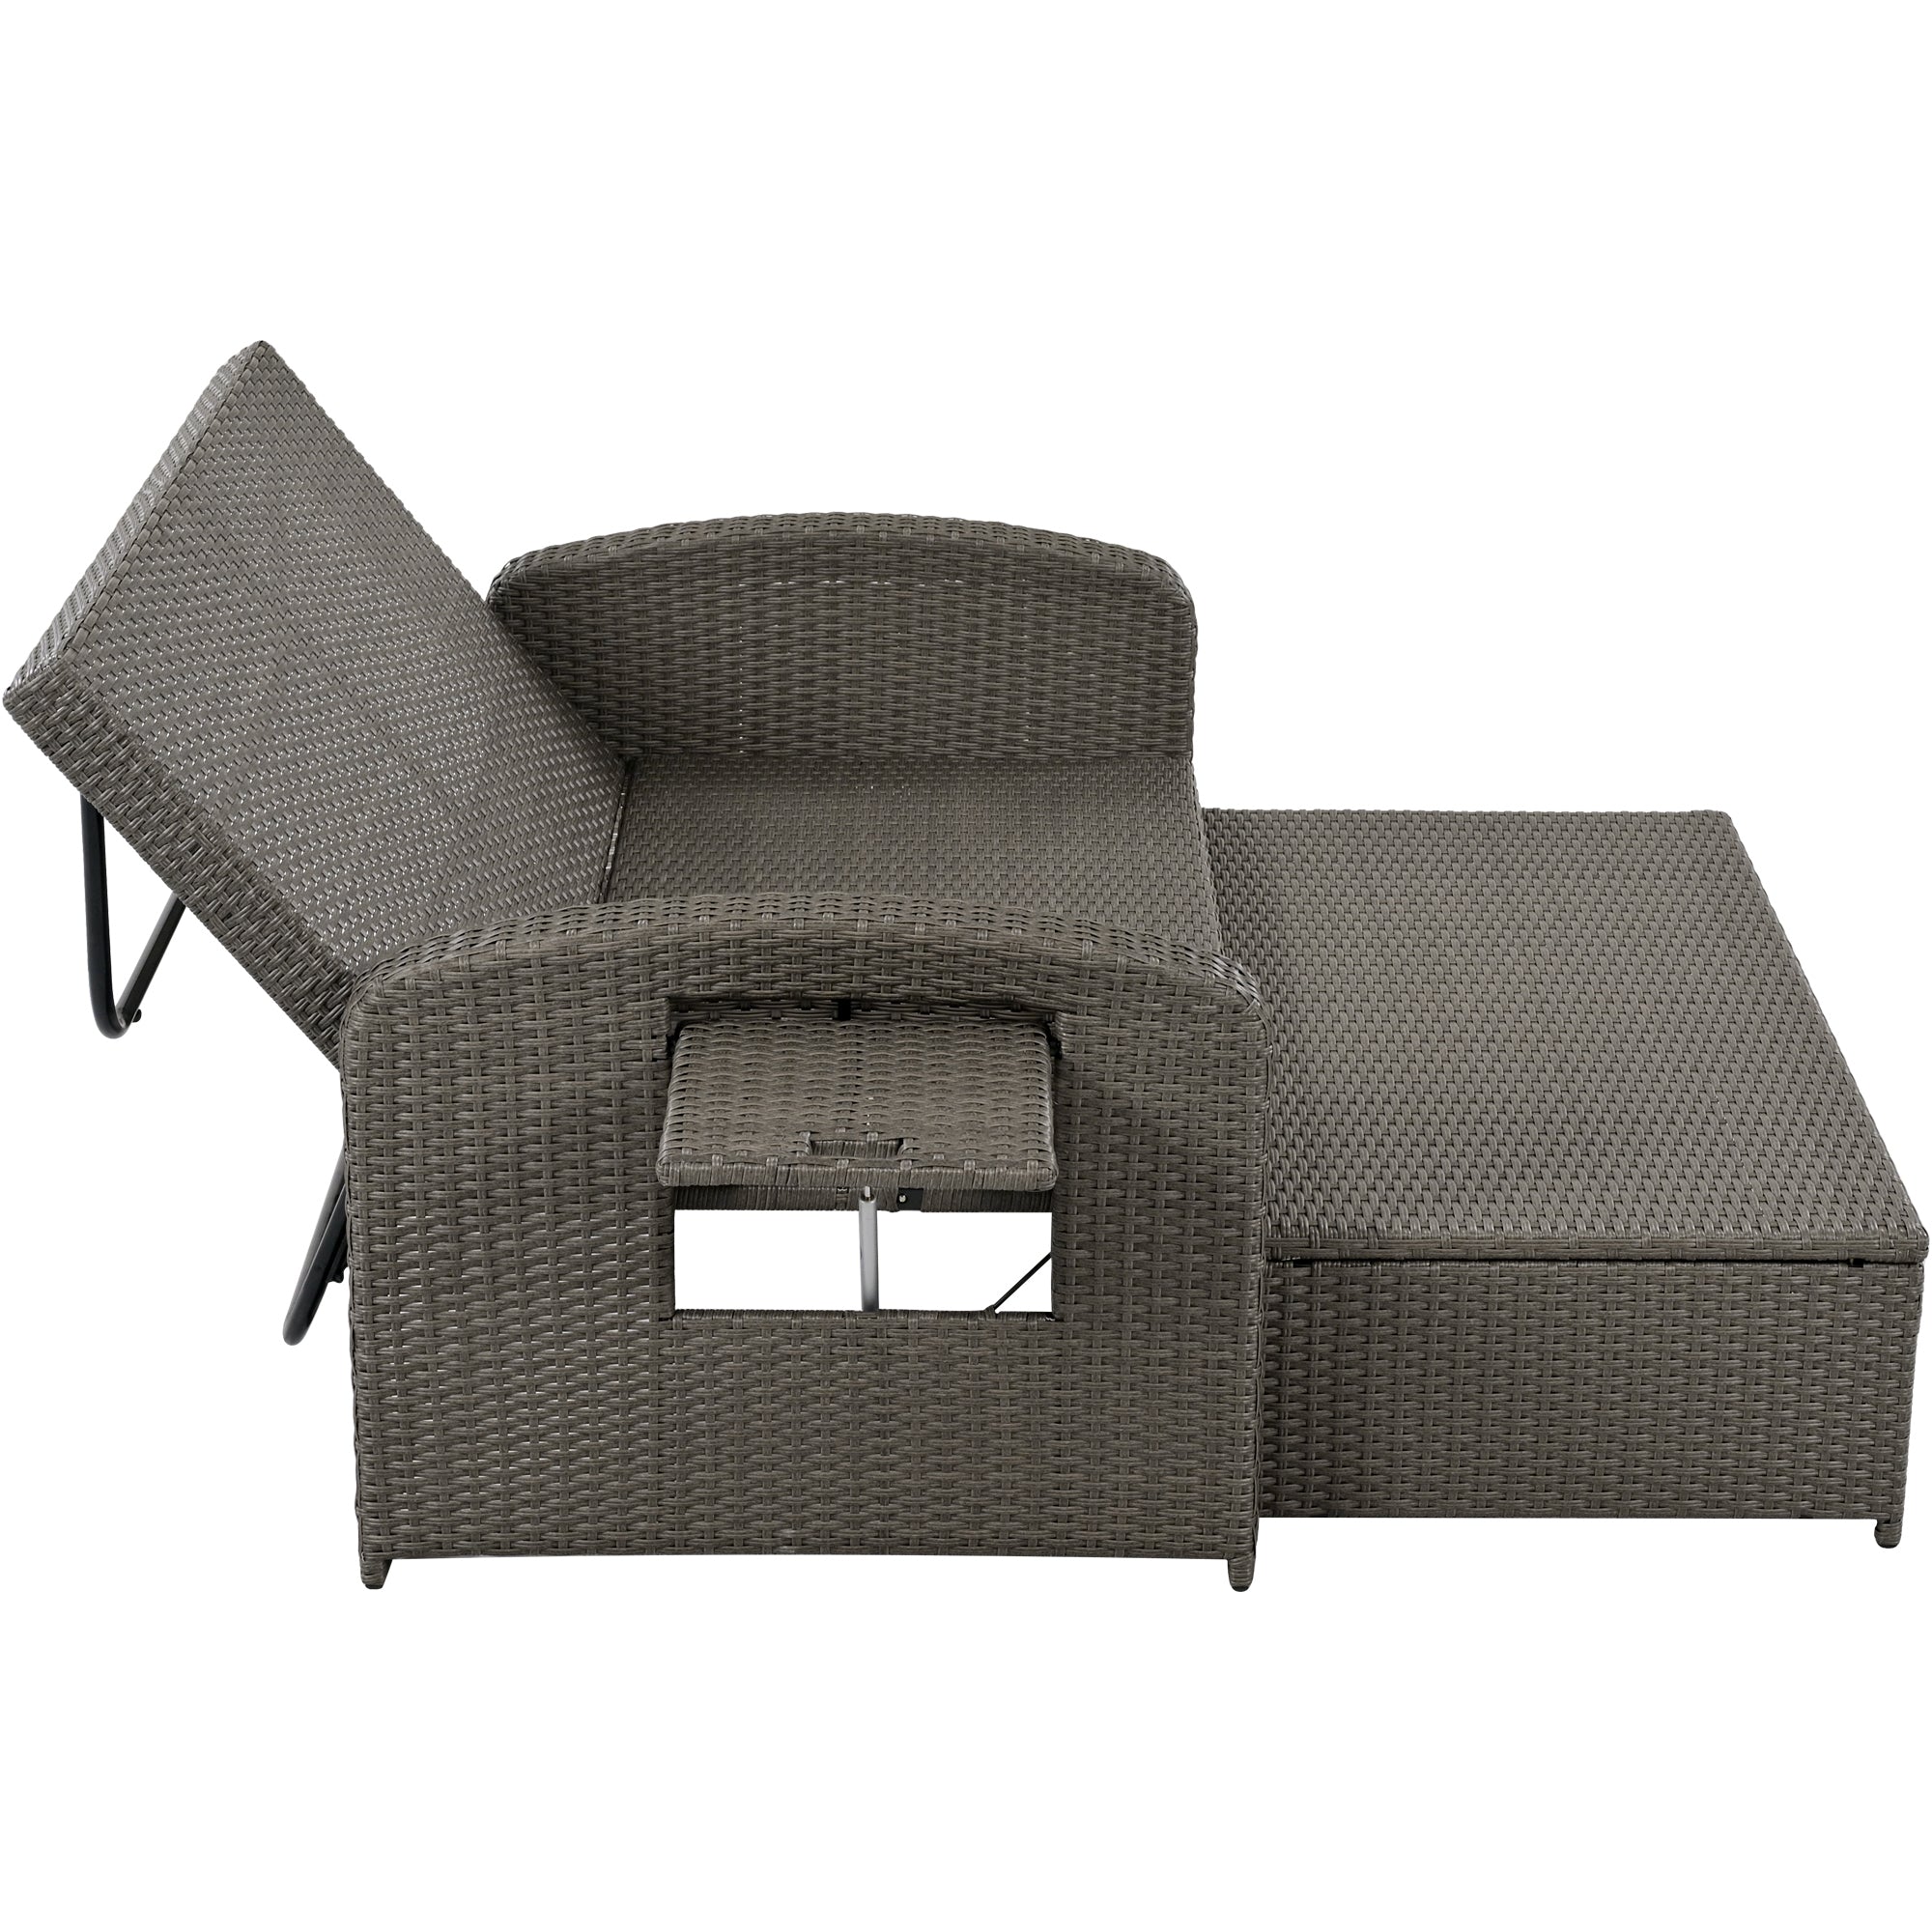 2-Person Patio Wicker Chaise Lounge Reclining Daybed with Adjustable Back, Cushions & Protection Cover,Gray